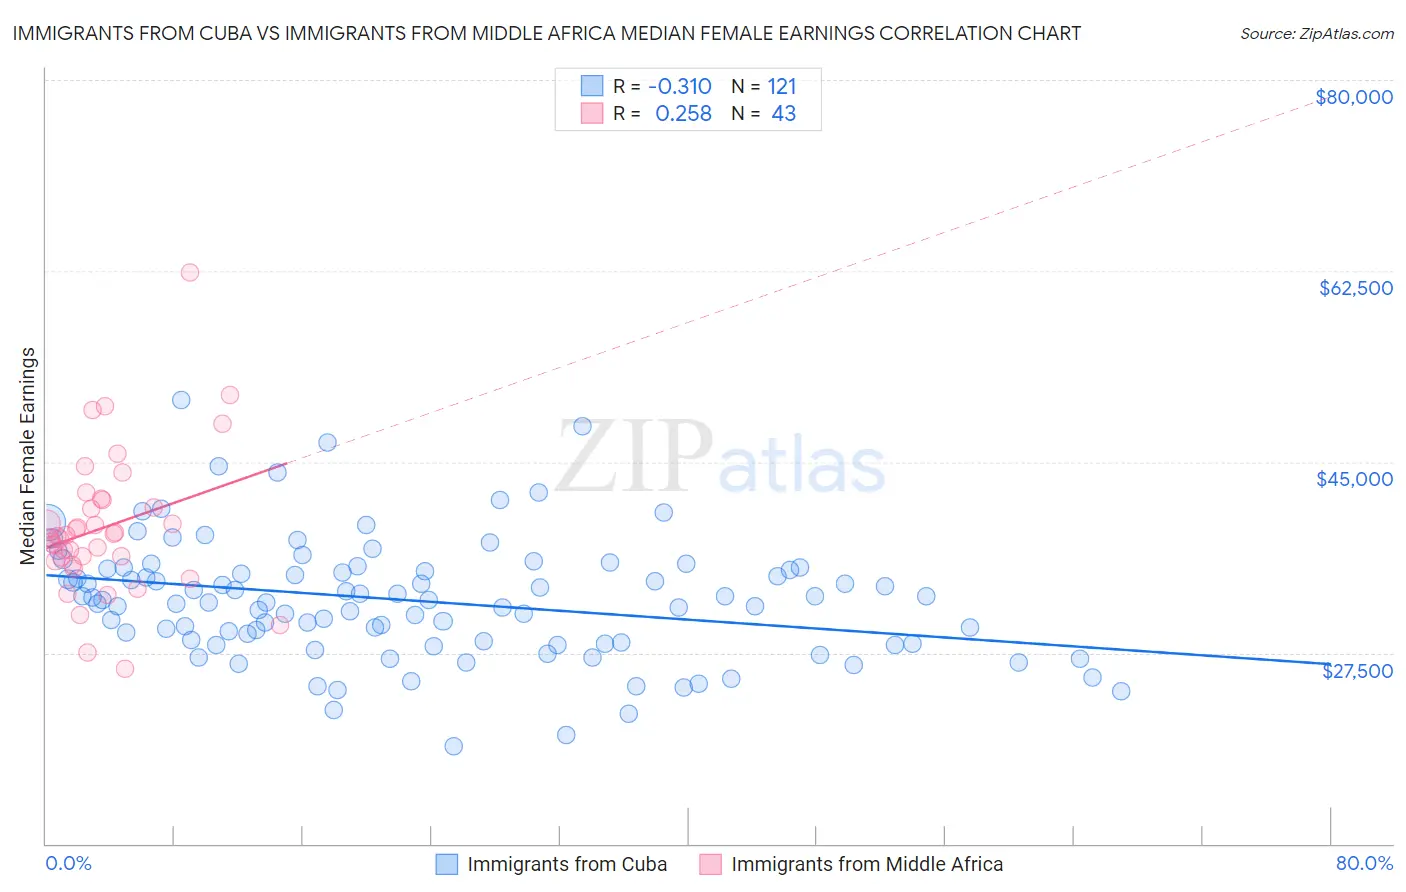 Immigrants from Cuba vs Immigrants from Middle Africa Median Female Earnings